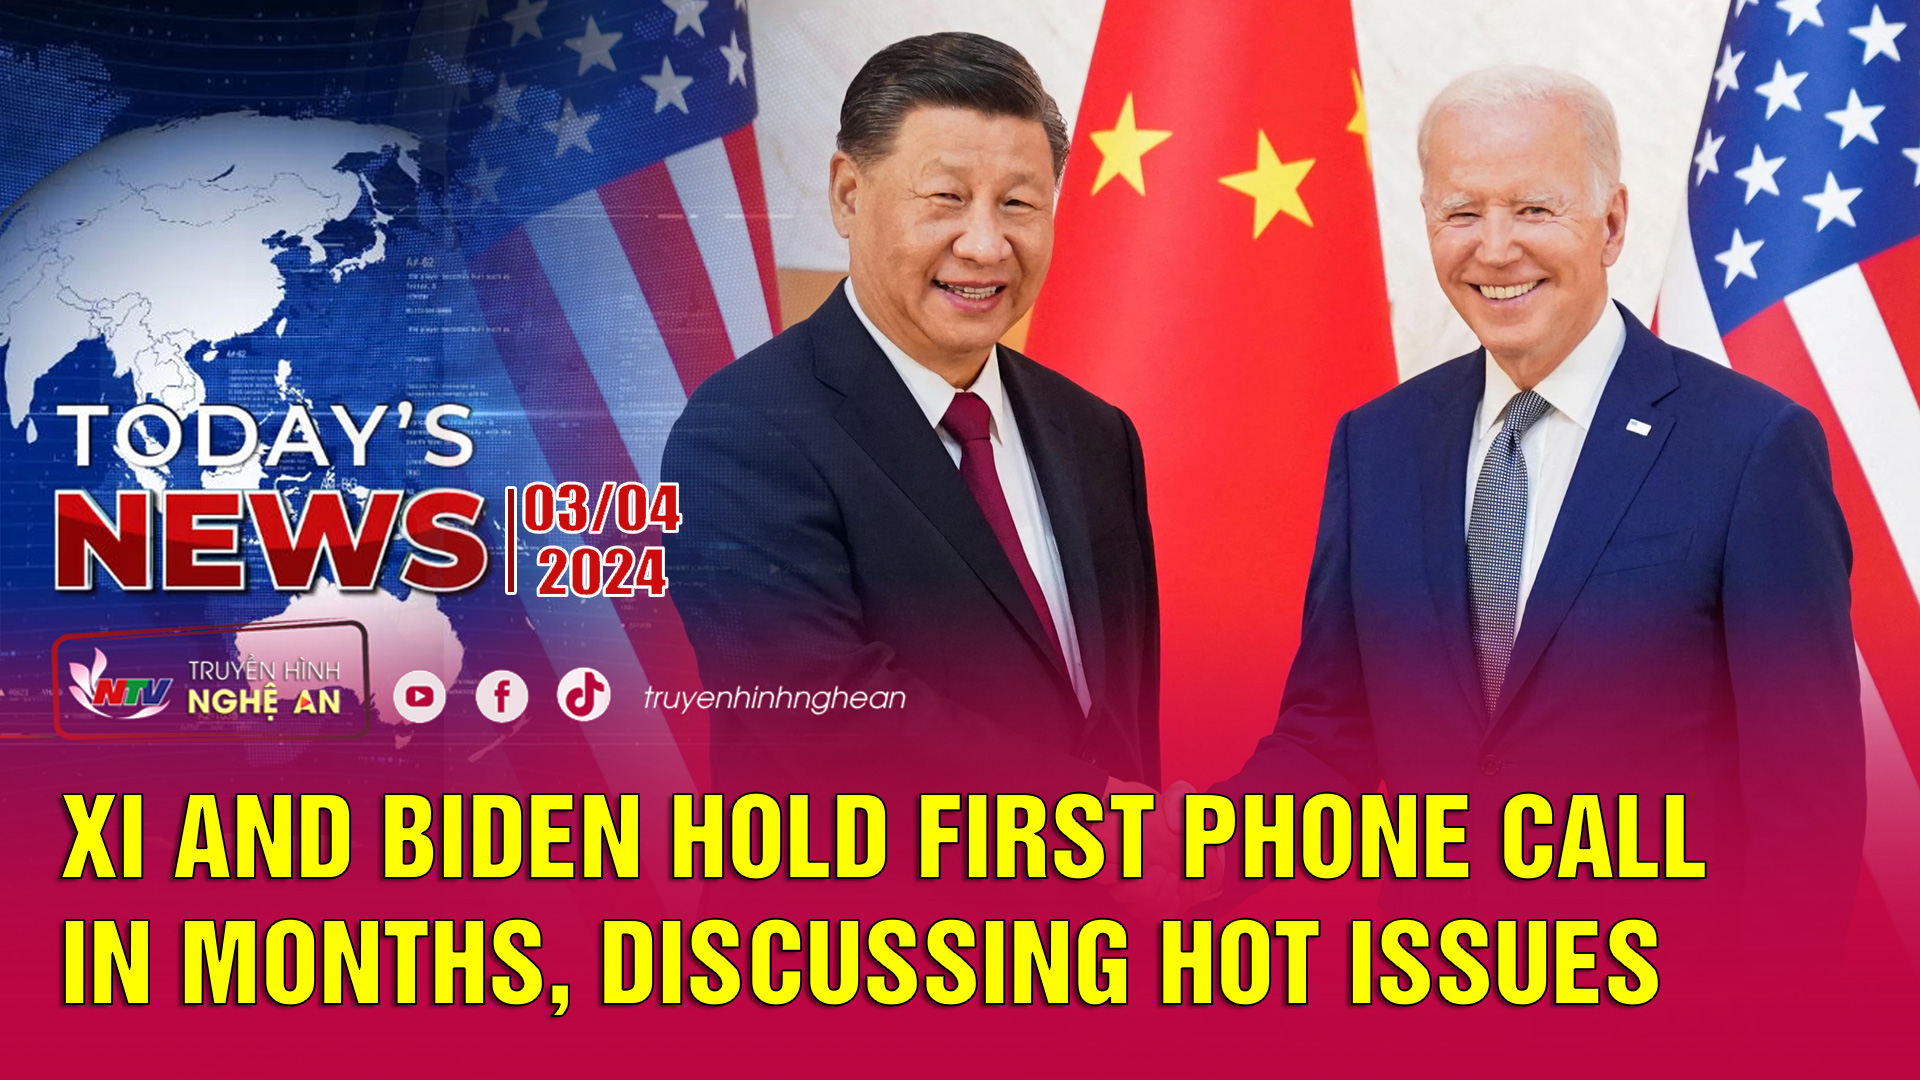 Today's News 03/4/2024: Xi and Biden hold first phone call in months, discussing hot issues